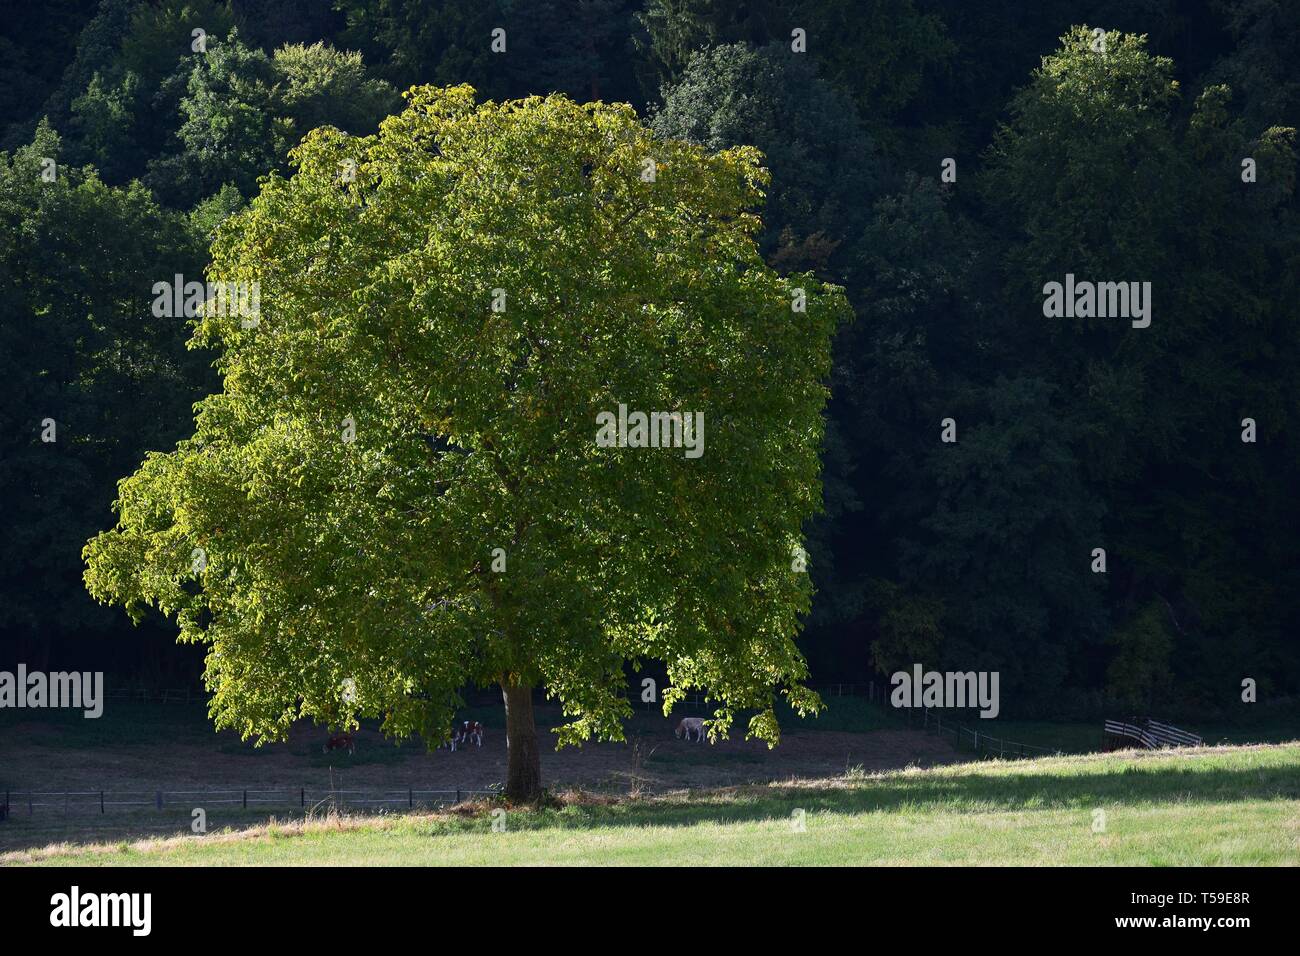 A walnut tree in front of dark forest. Fischbachtal, Odenwald, Germany. Stock Photo